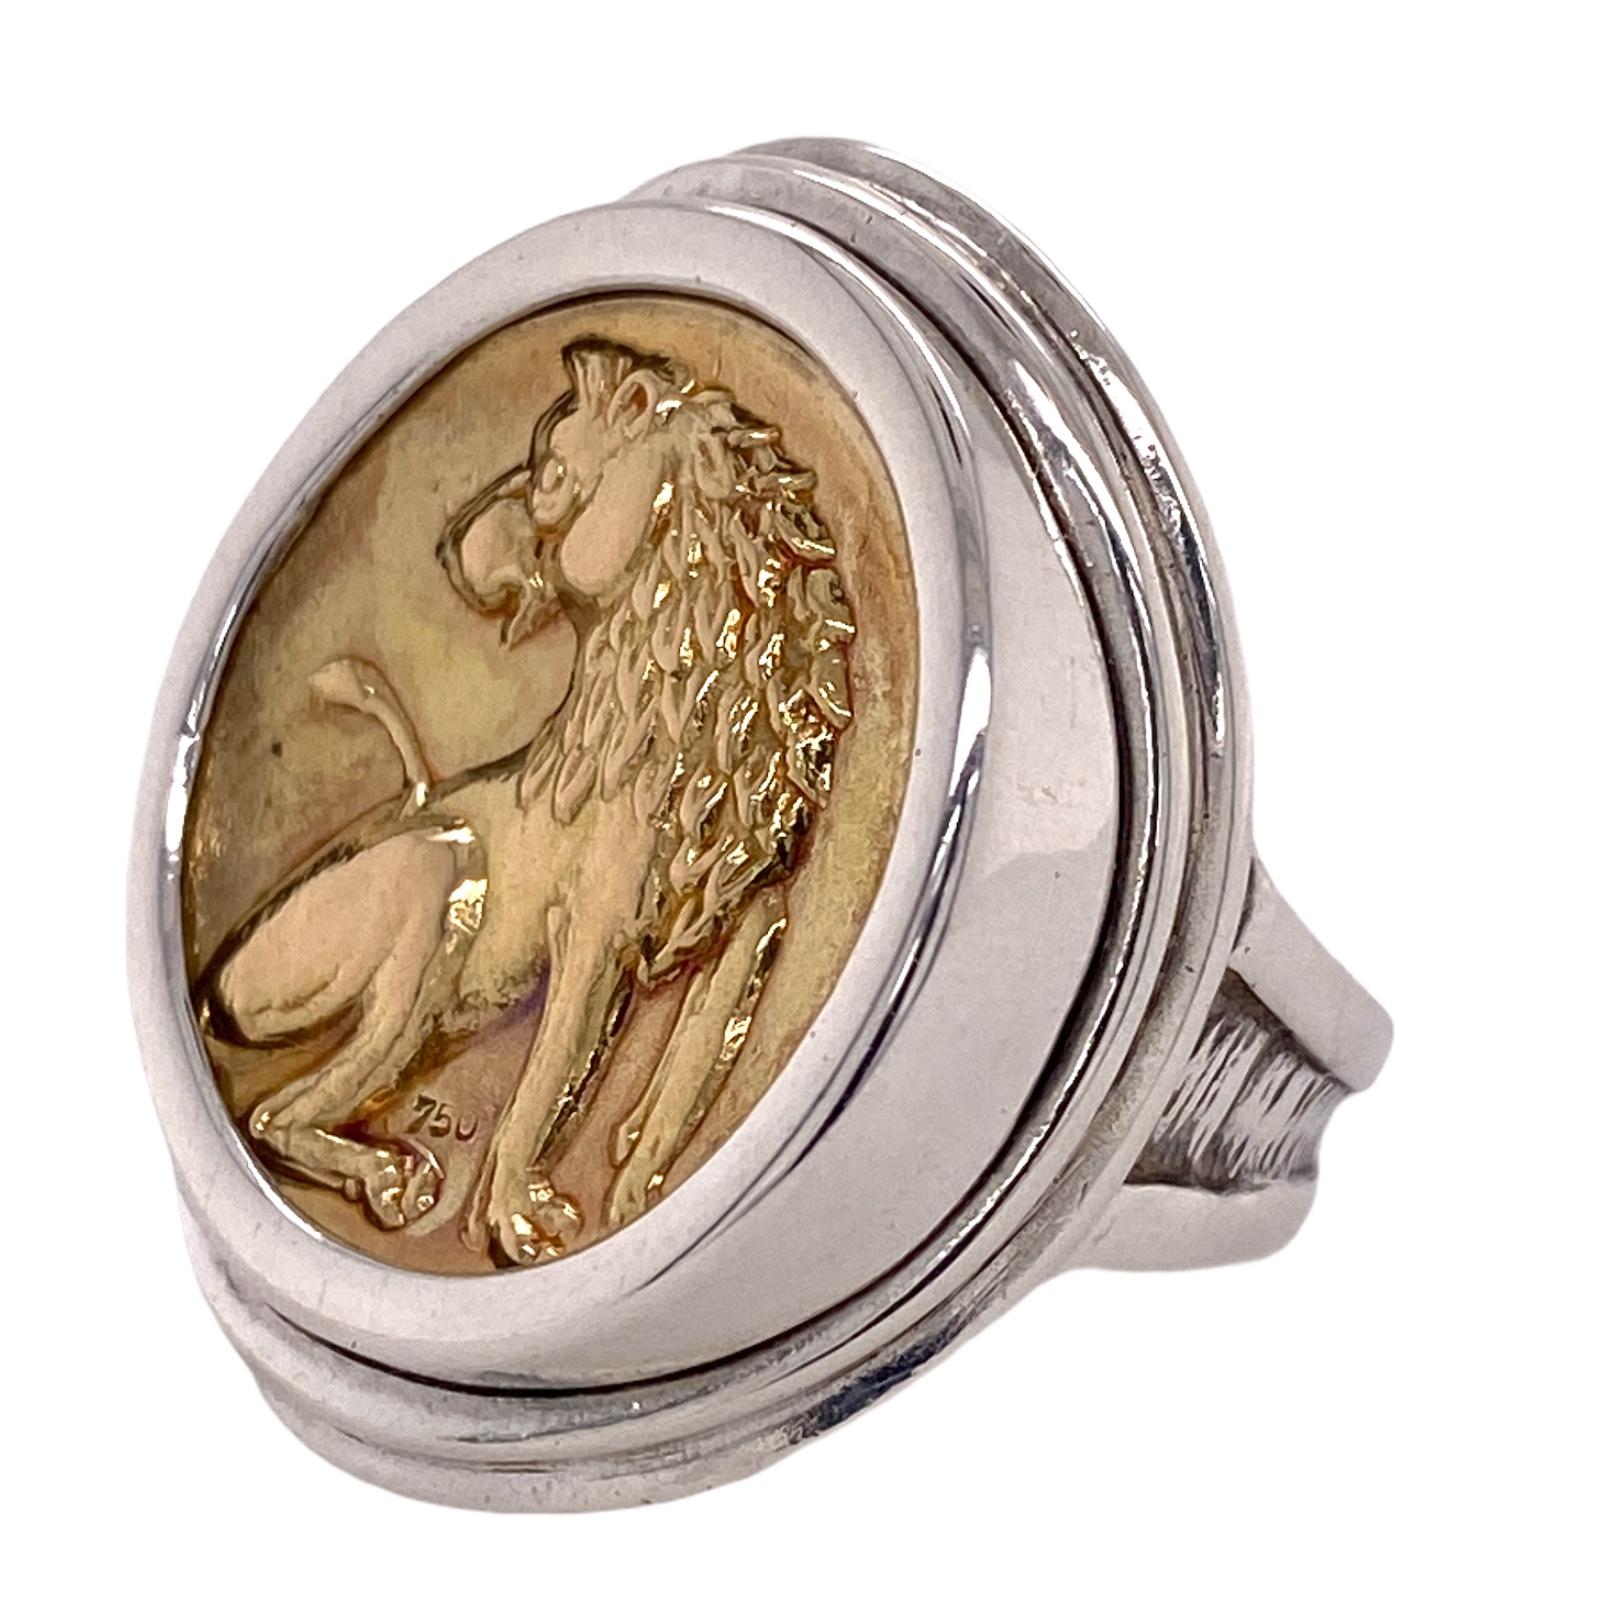 Ilias Lalaounis coin ring fashioned in sterling silver and gold plated sterling silver (two tone). The center coin shape medallion features an embossed wolf. The top measures 22 x 28mm, and the ring is currently size 5.5 (can be sized). Signed